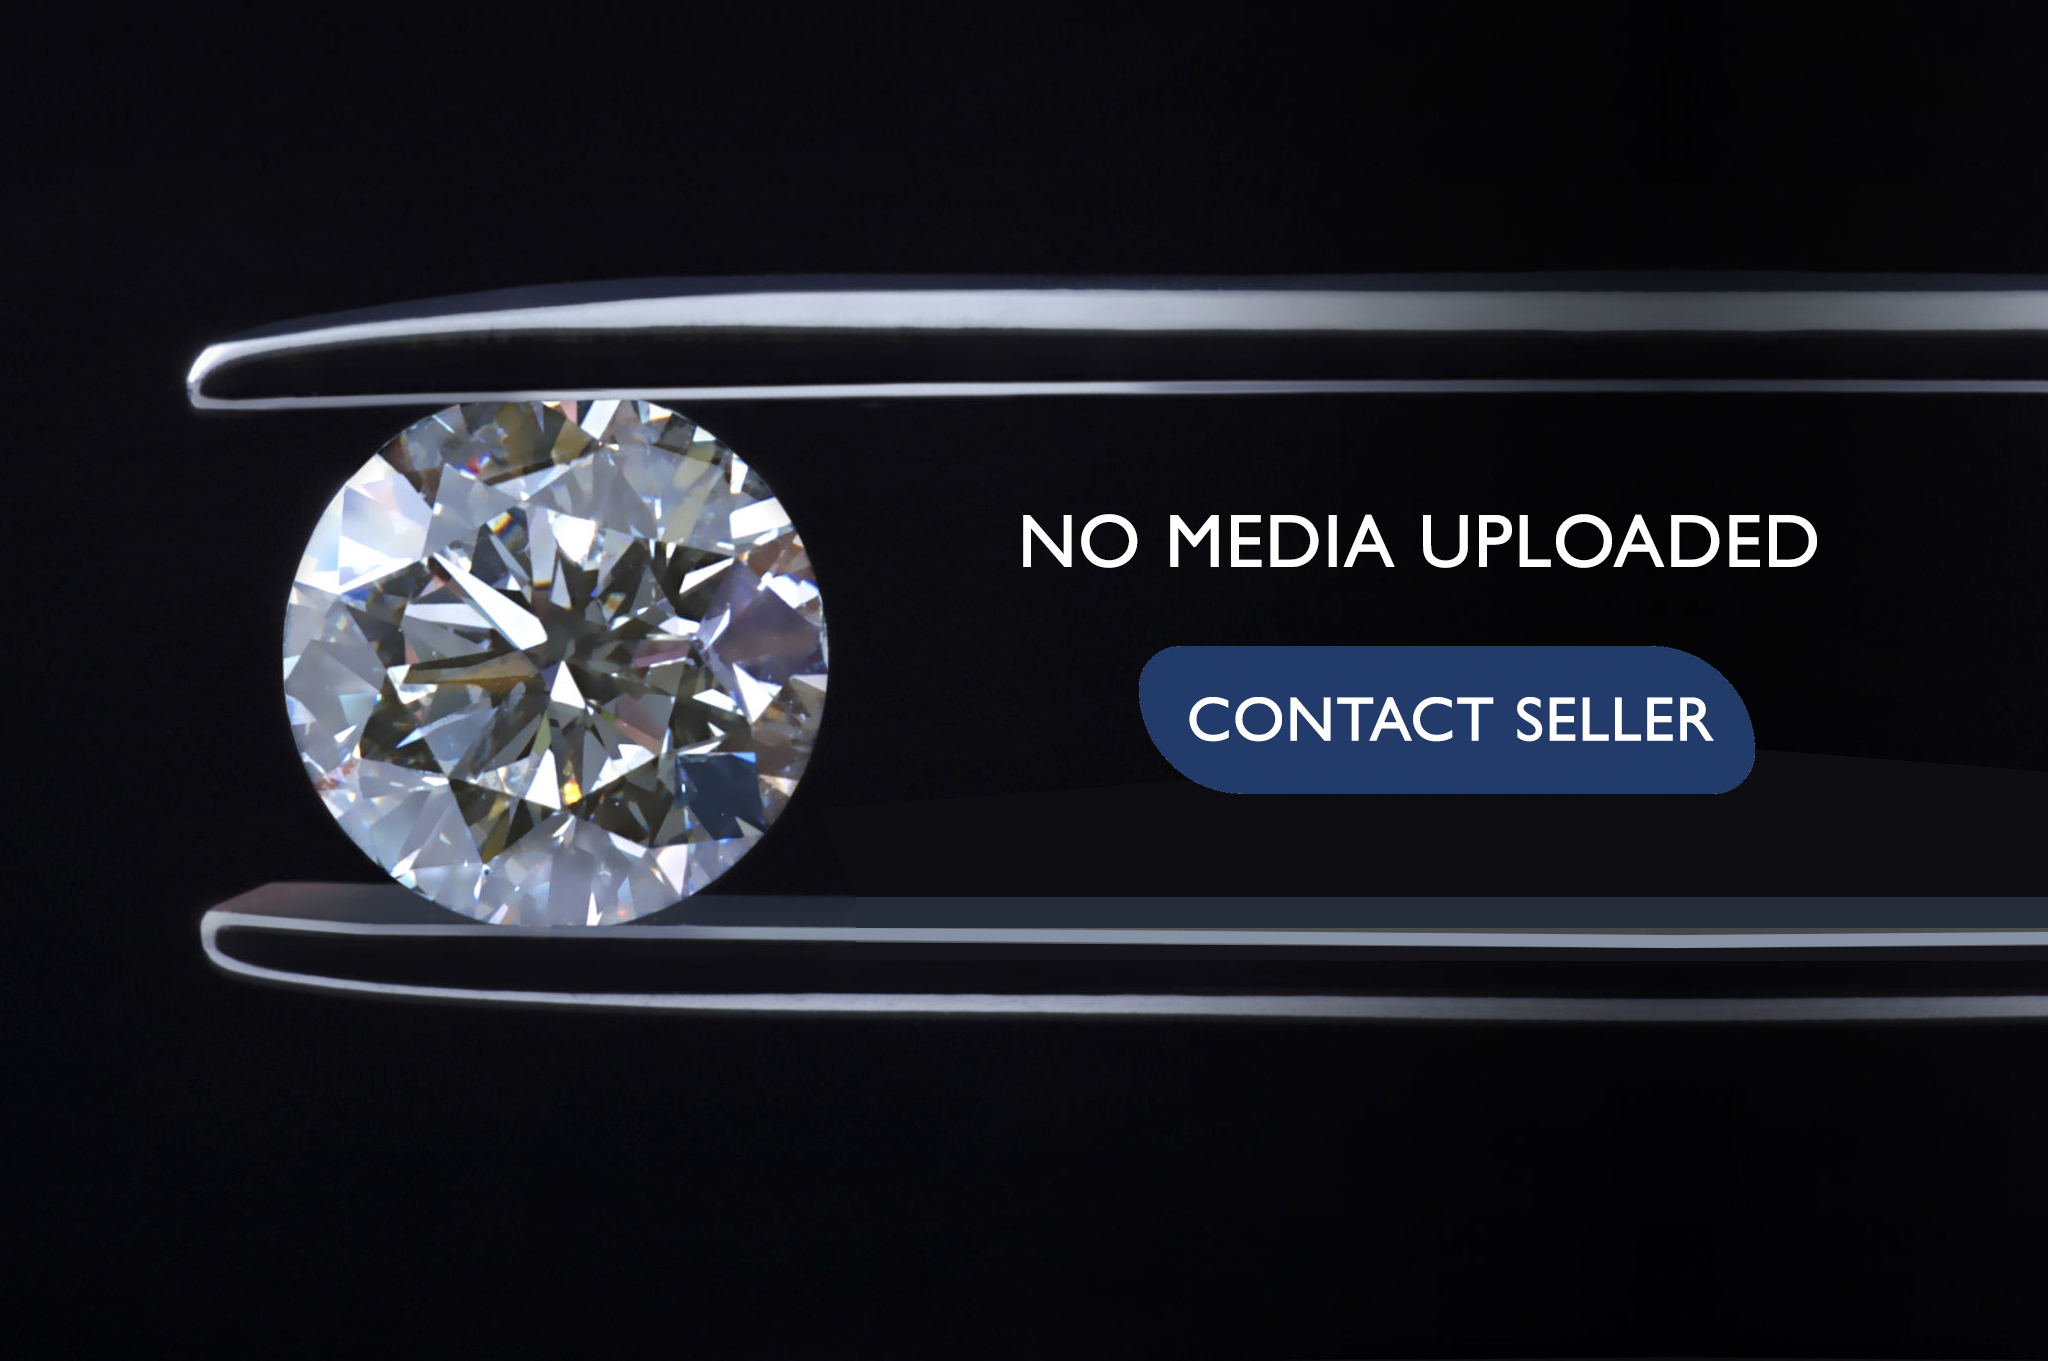 Product Details - Buying Diamonds in Peace